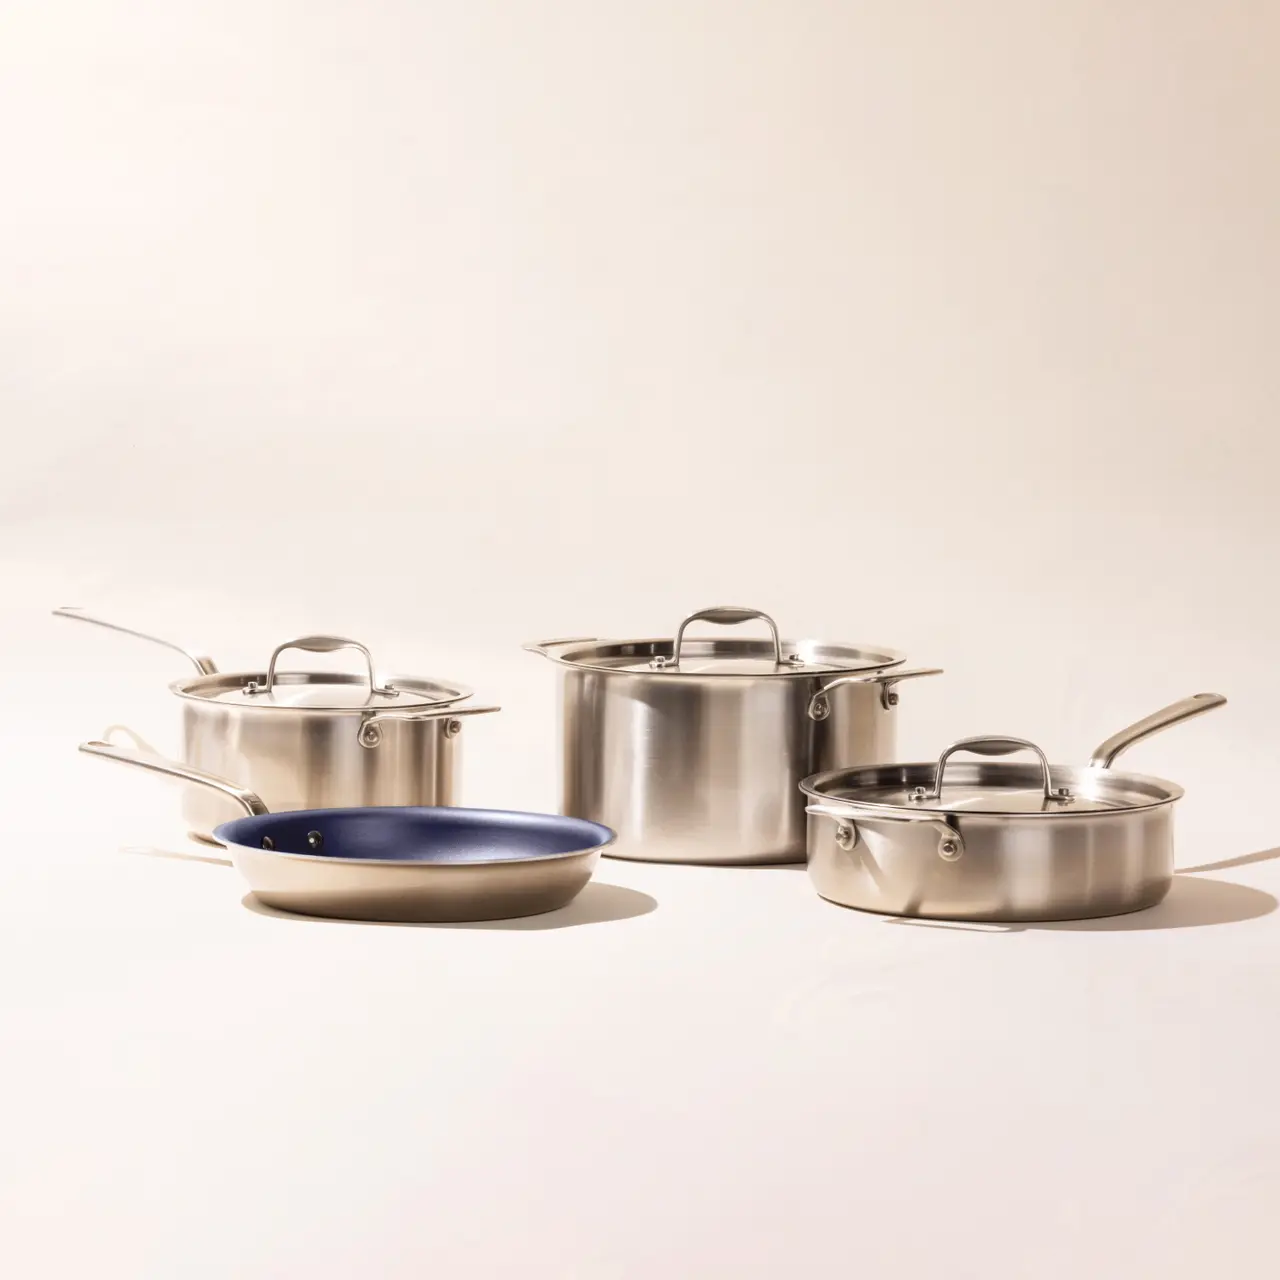 A set of stainless steel cookware including pots and a pan with one blue interior, displayed against a light background.